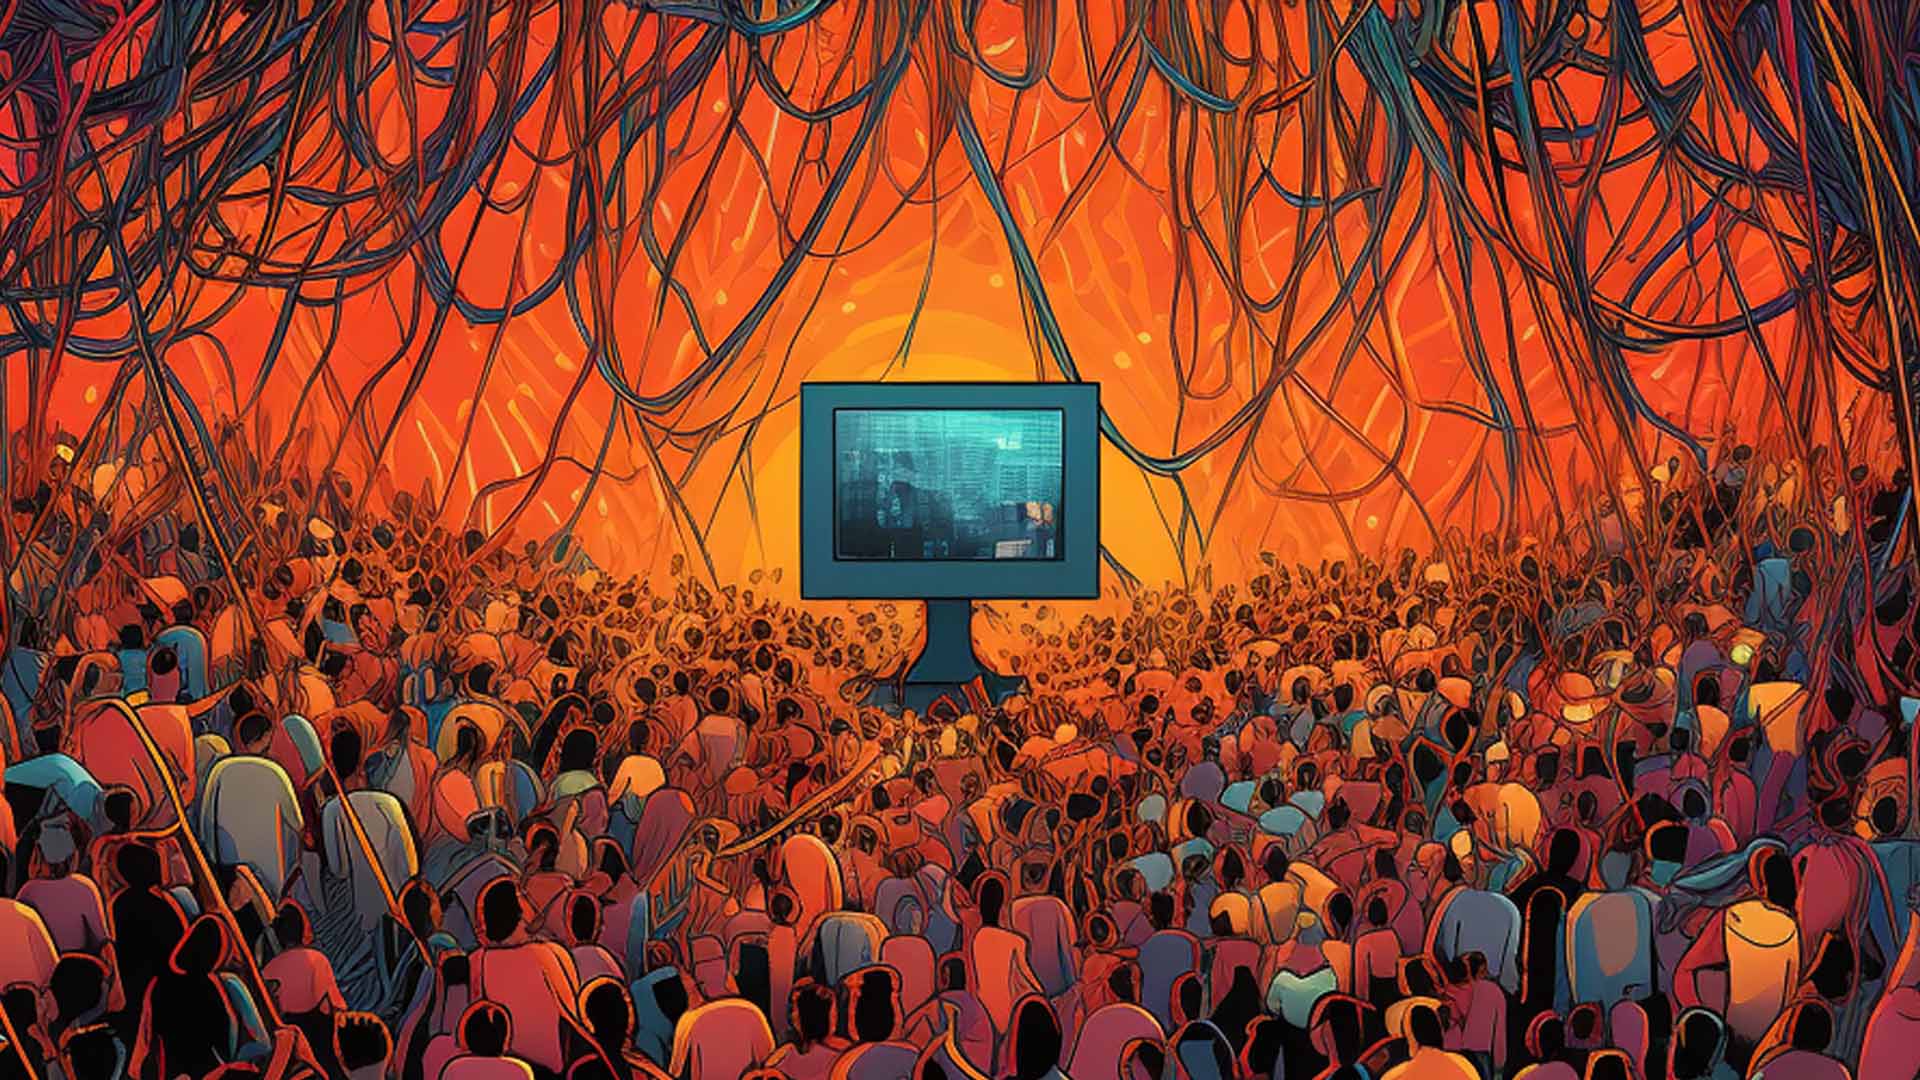 A graphic illustration showing a computer screen at the center. Above we see tangled cables hanging from the cieling. Below the computer we see crowds of people looking at the screen.